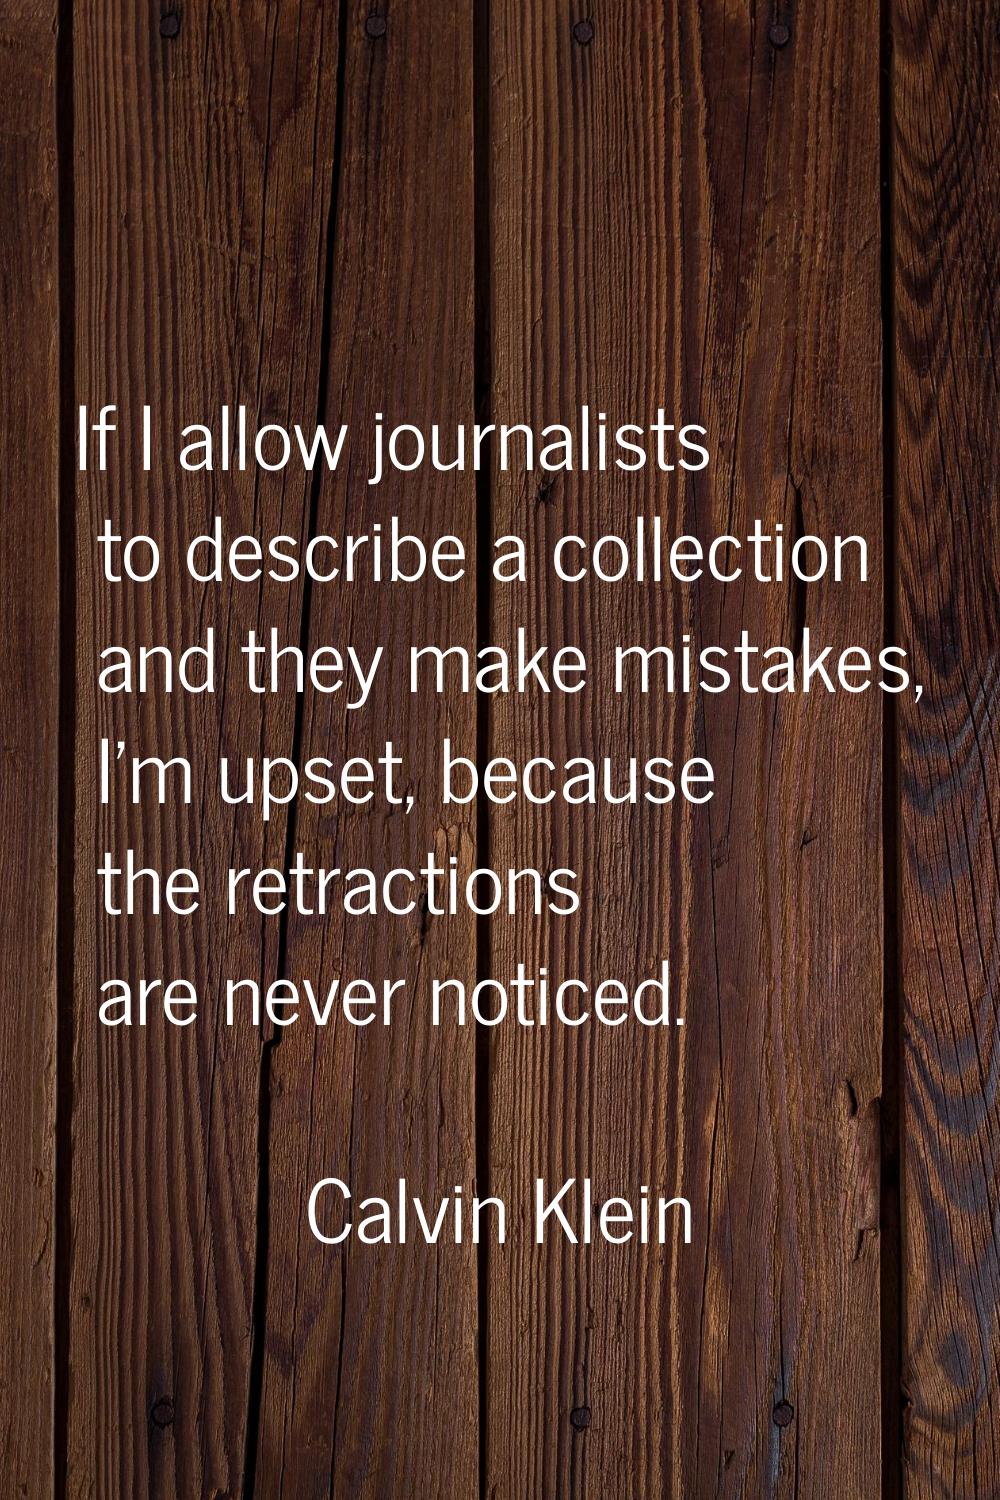 If I allow journalists to describe a collection and they make mistakes, I'm upset, because the retr